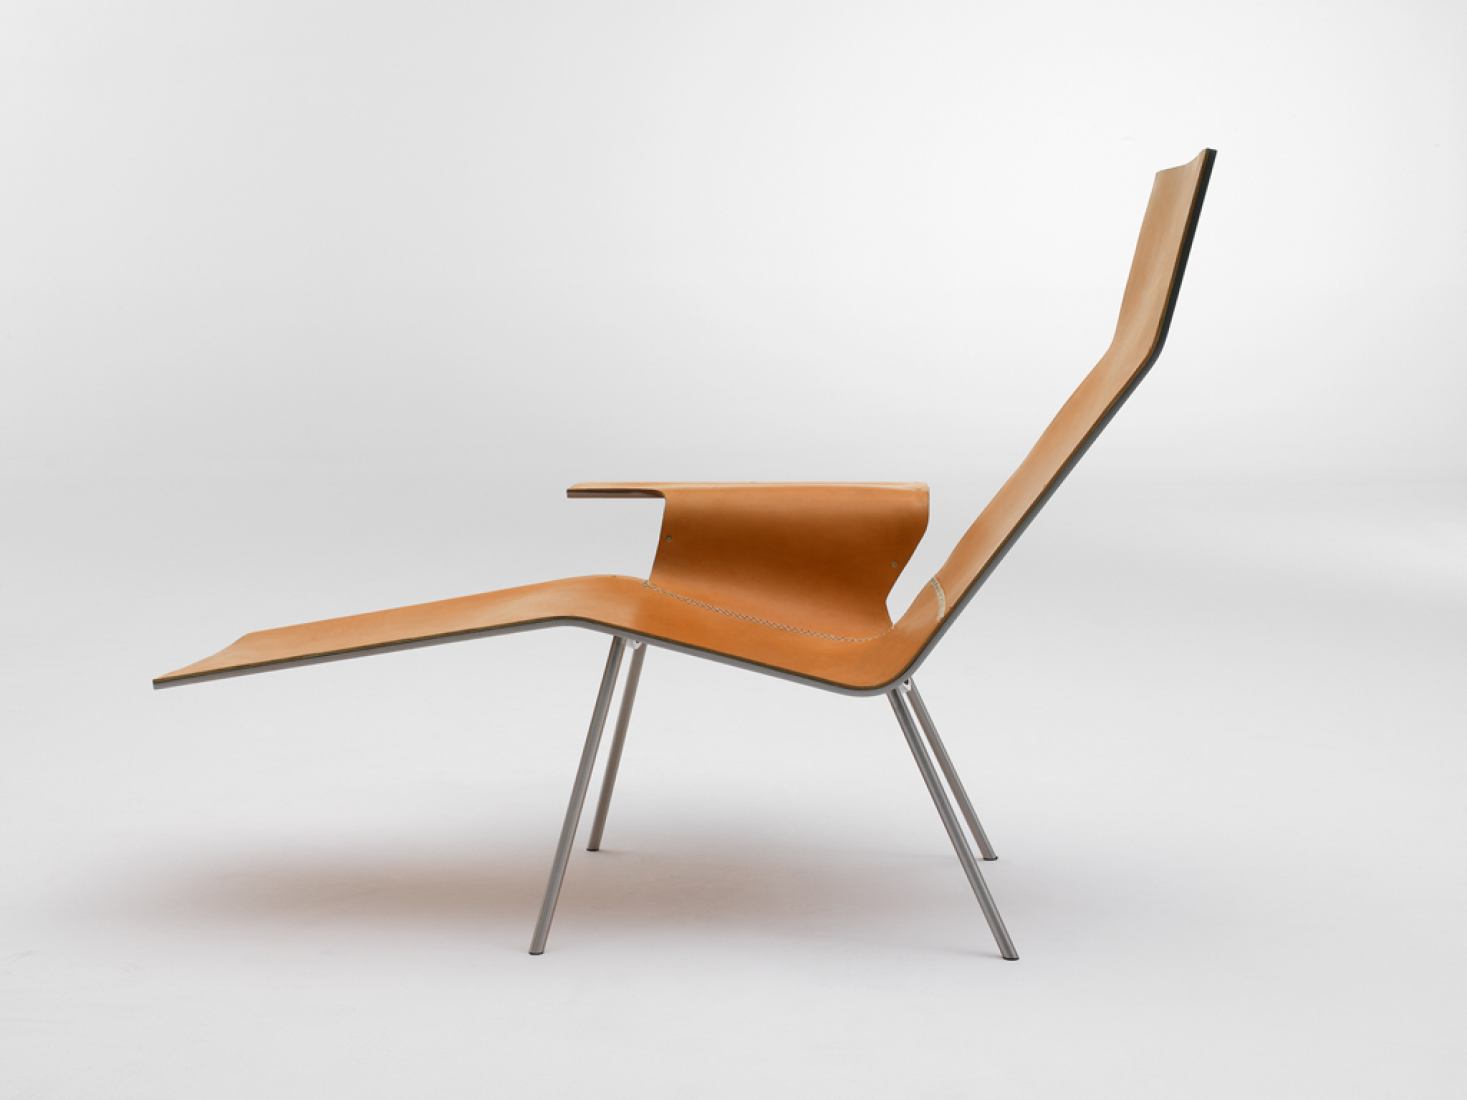 Leather Lounge Chair LL04 by Maarten van Severen, 2004. Courtesy of Kunsthal Rotterdam.